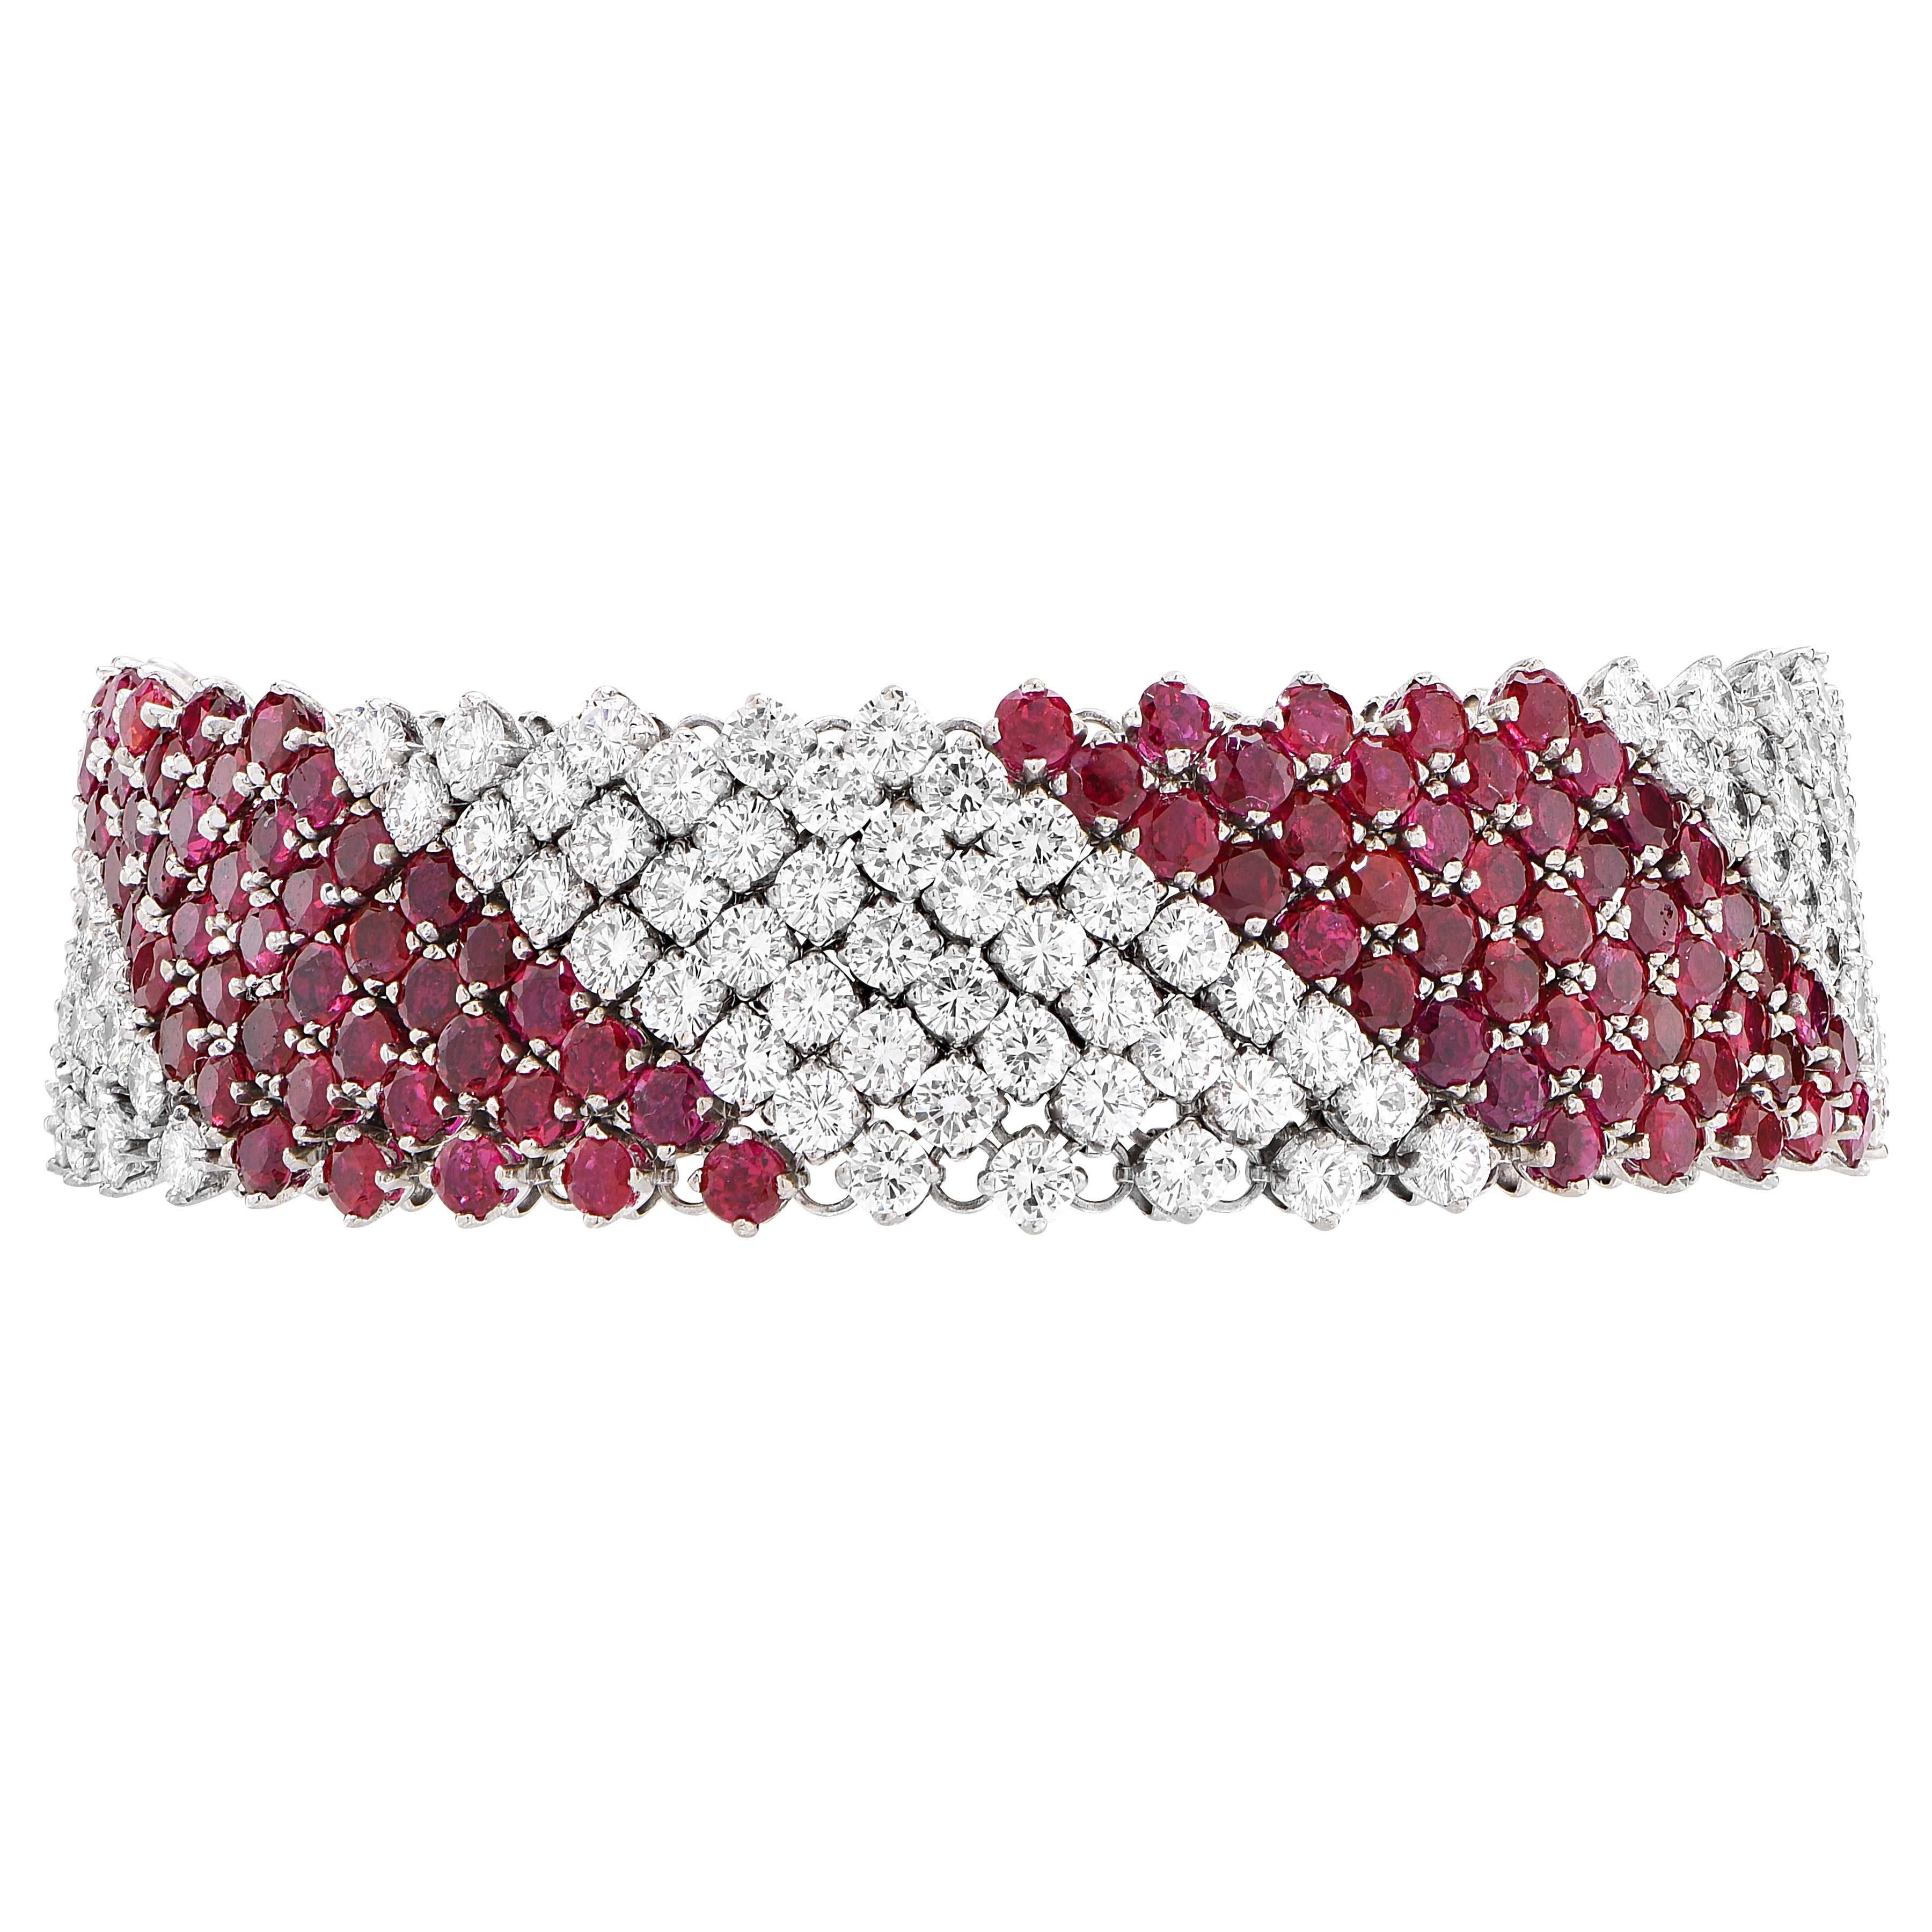 16 Carats Diamond and 19 Carats Ruby 18 Karat White Gold Bracelet In Excellent Condition For Sale In Bay Harbor Islands, FL